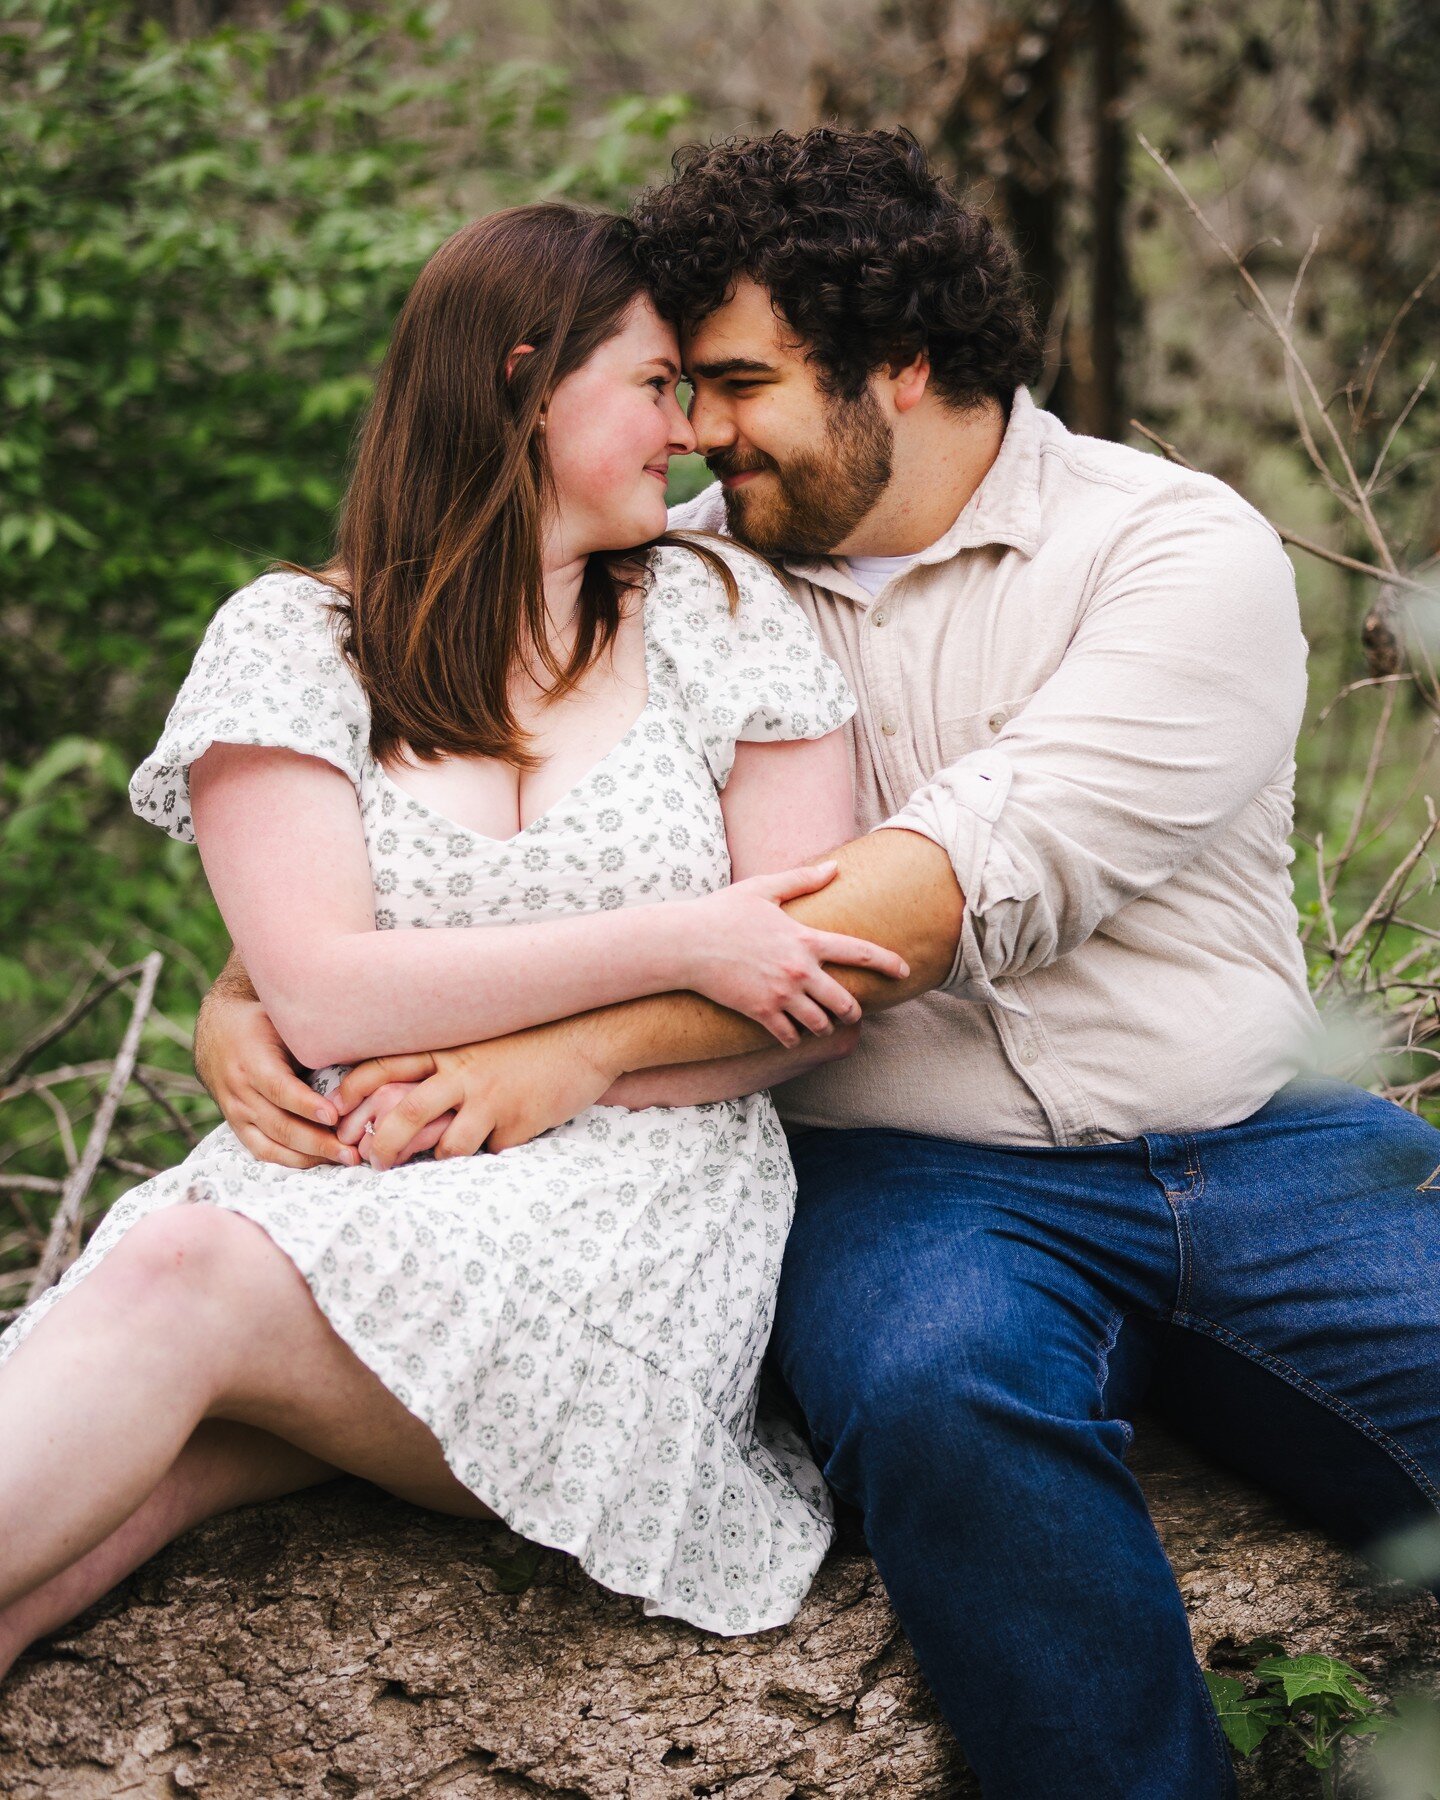 We recently had a lovely #engagementsession at @ijamsnaturecenter in #knoxville #tn Rachel and Marty looked so happy as they laughed and enjoyed a #picnic surrounded by beautiful #flowers. We strolled through the #woods and by the #traintracks, takin